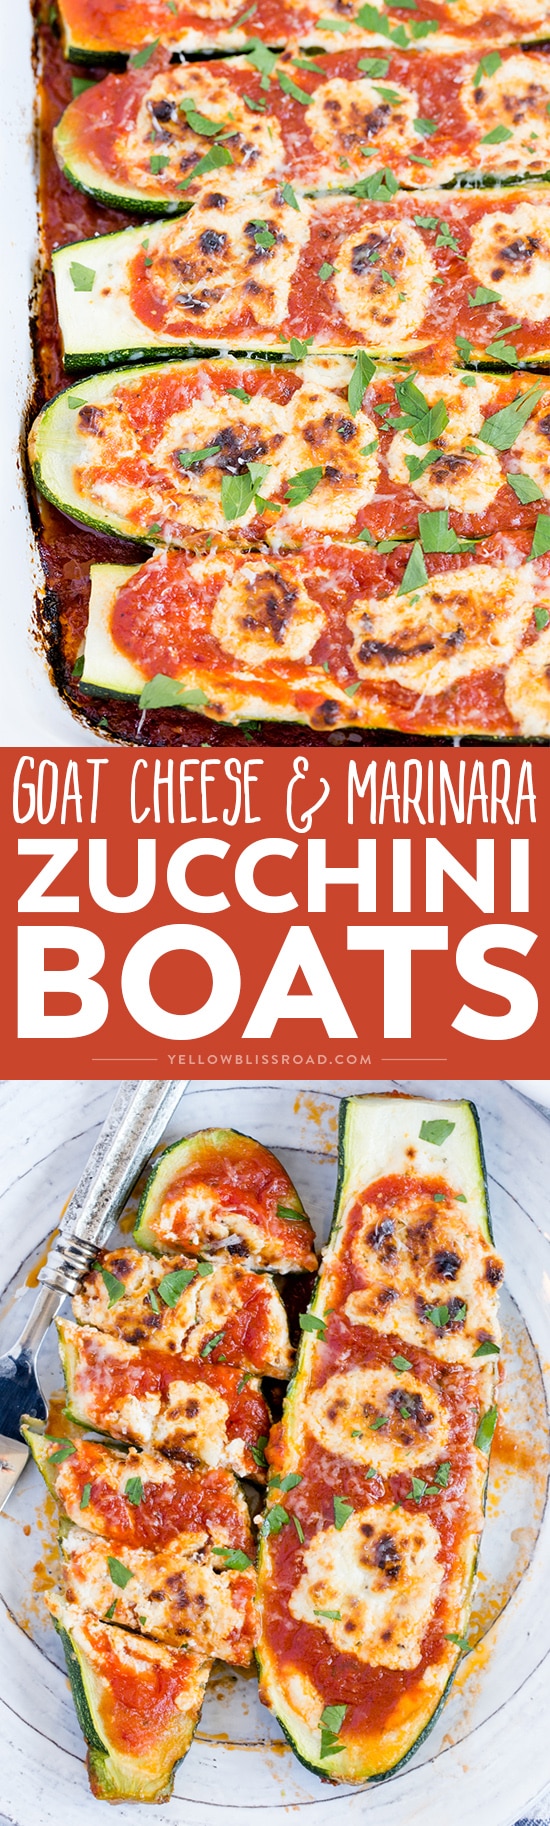 Goat Cheese & Marinara Stuffed Zucchini Boats collage with 2 images